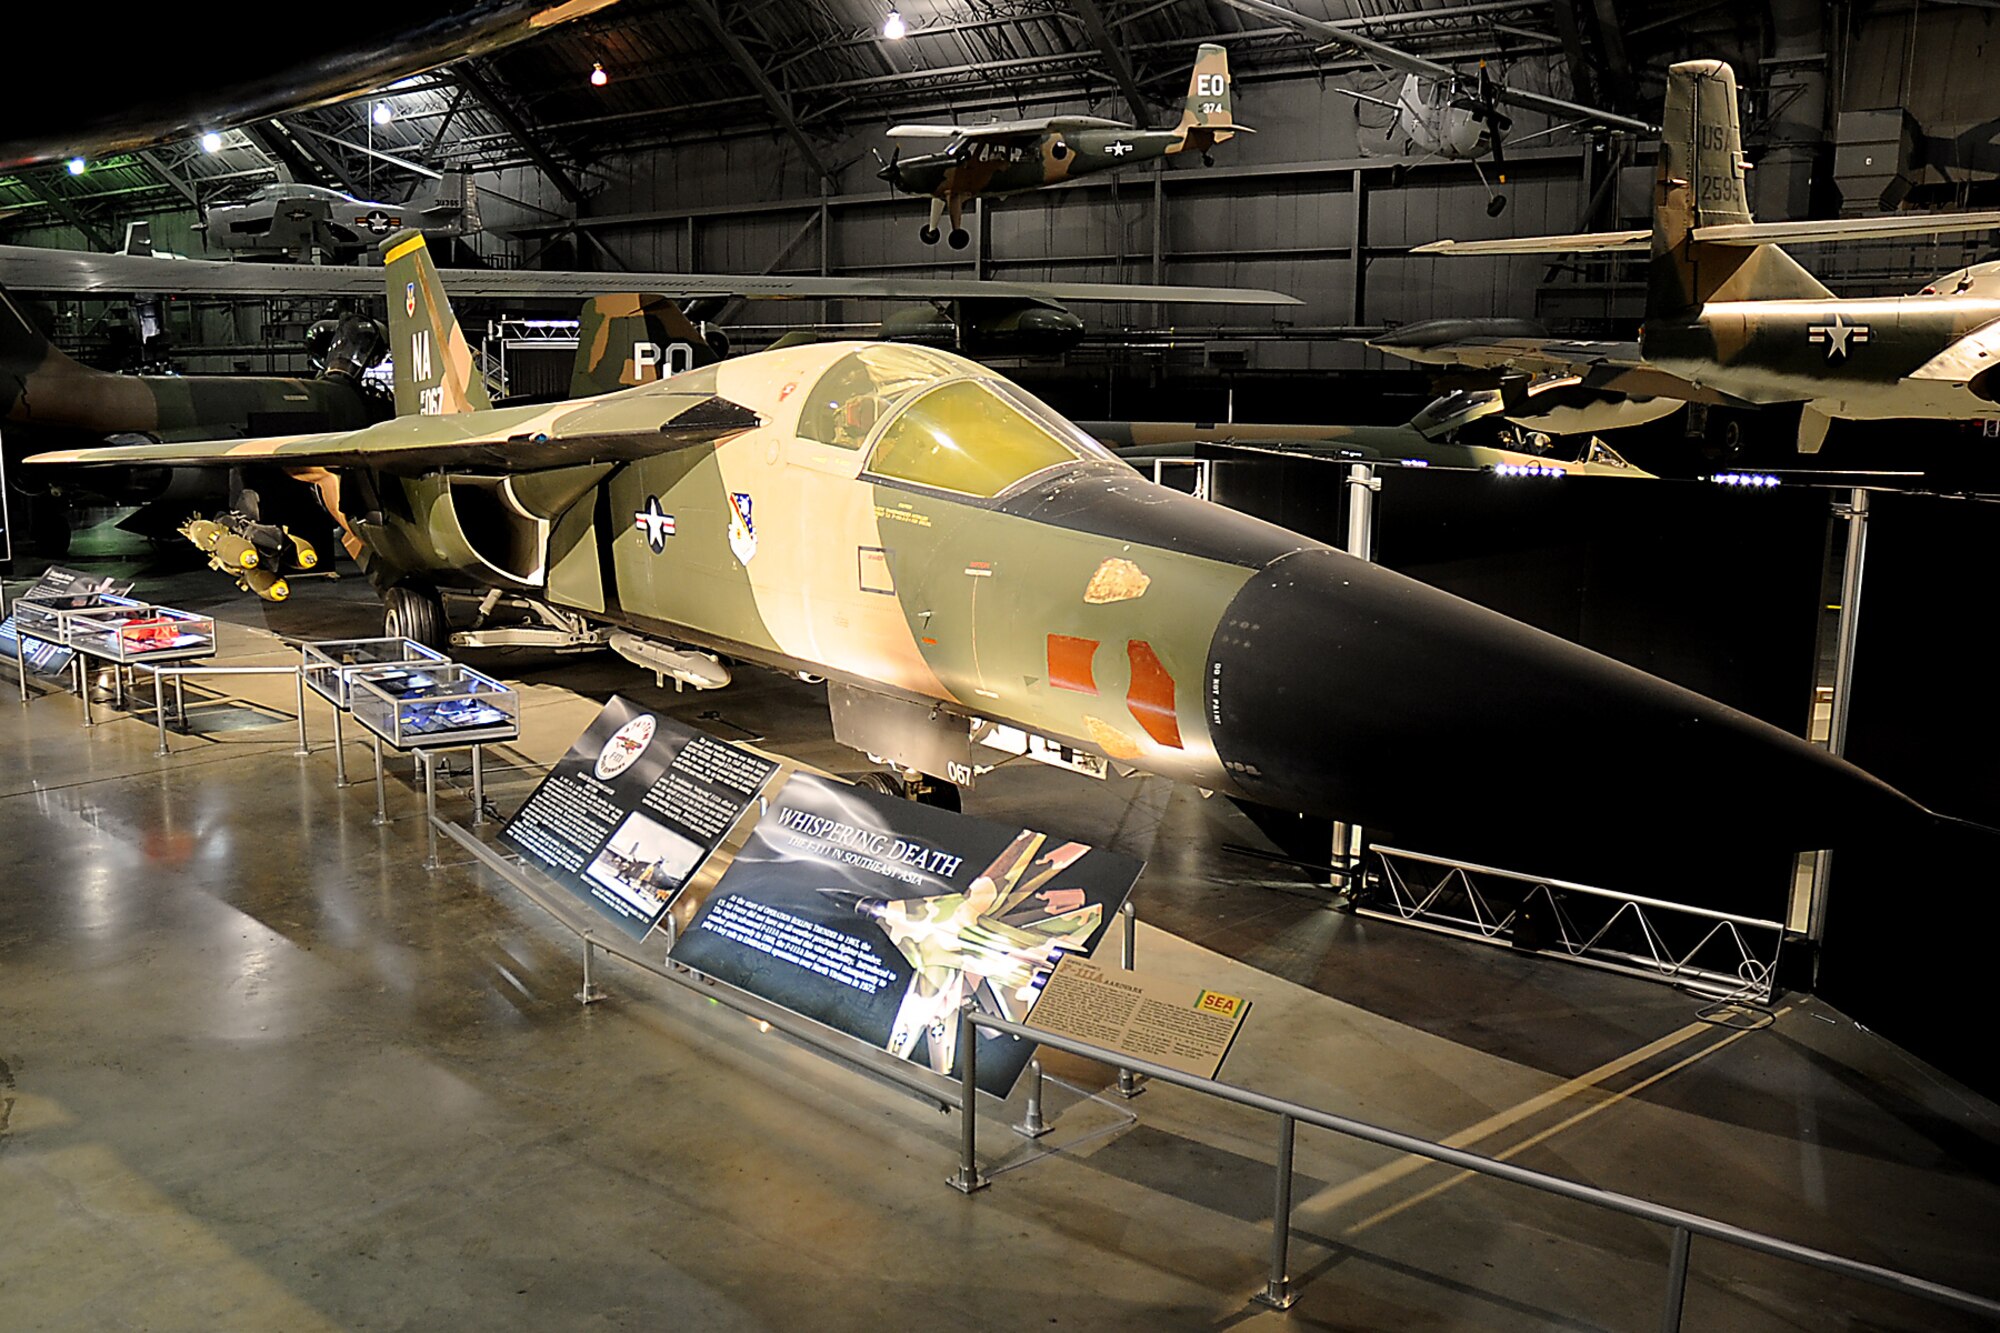 DAYTON, Ohio -- General Dynamics F-111A in the Southeast Asia War Gallery at the National Museum of the United States Air Force. (U.S. Air Force photo by Ken LaRock)
